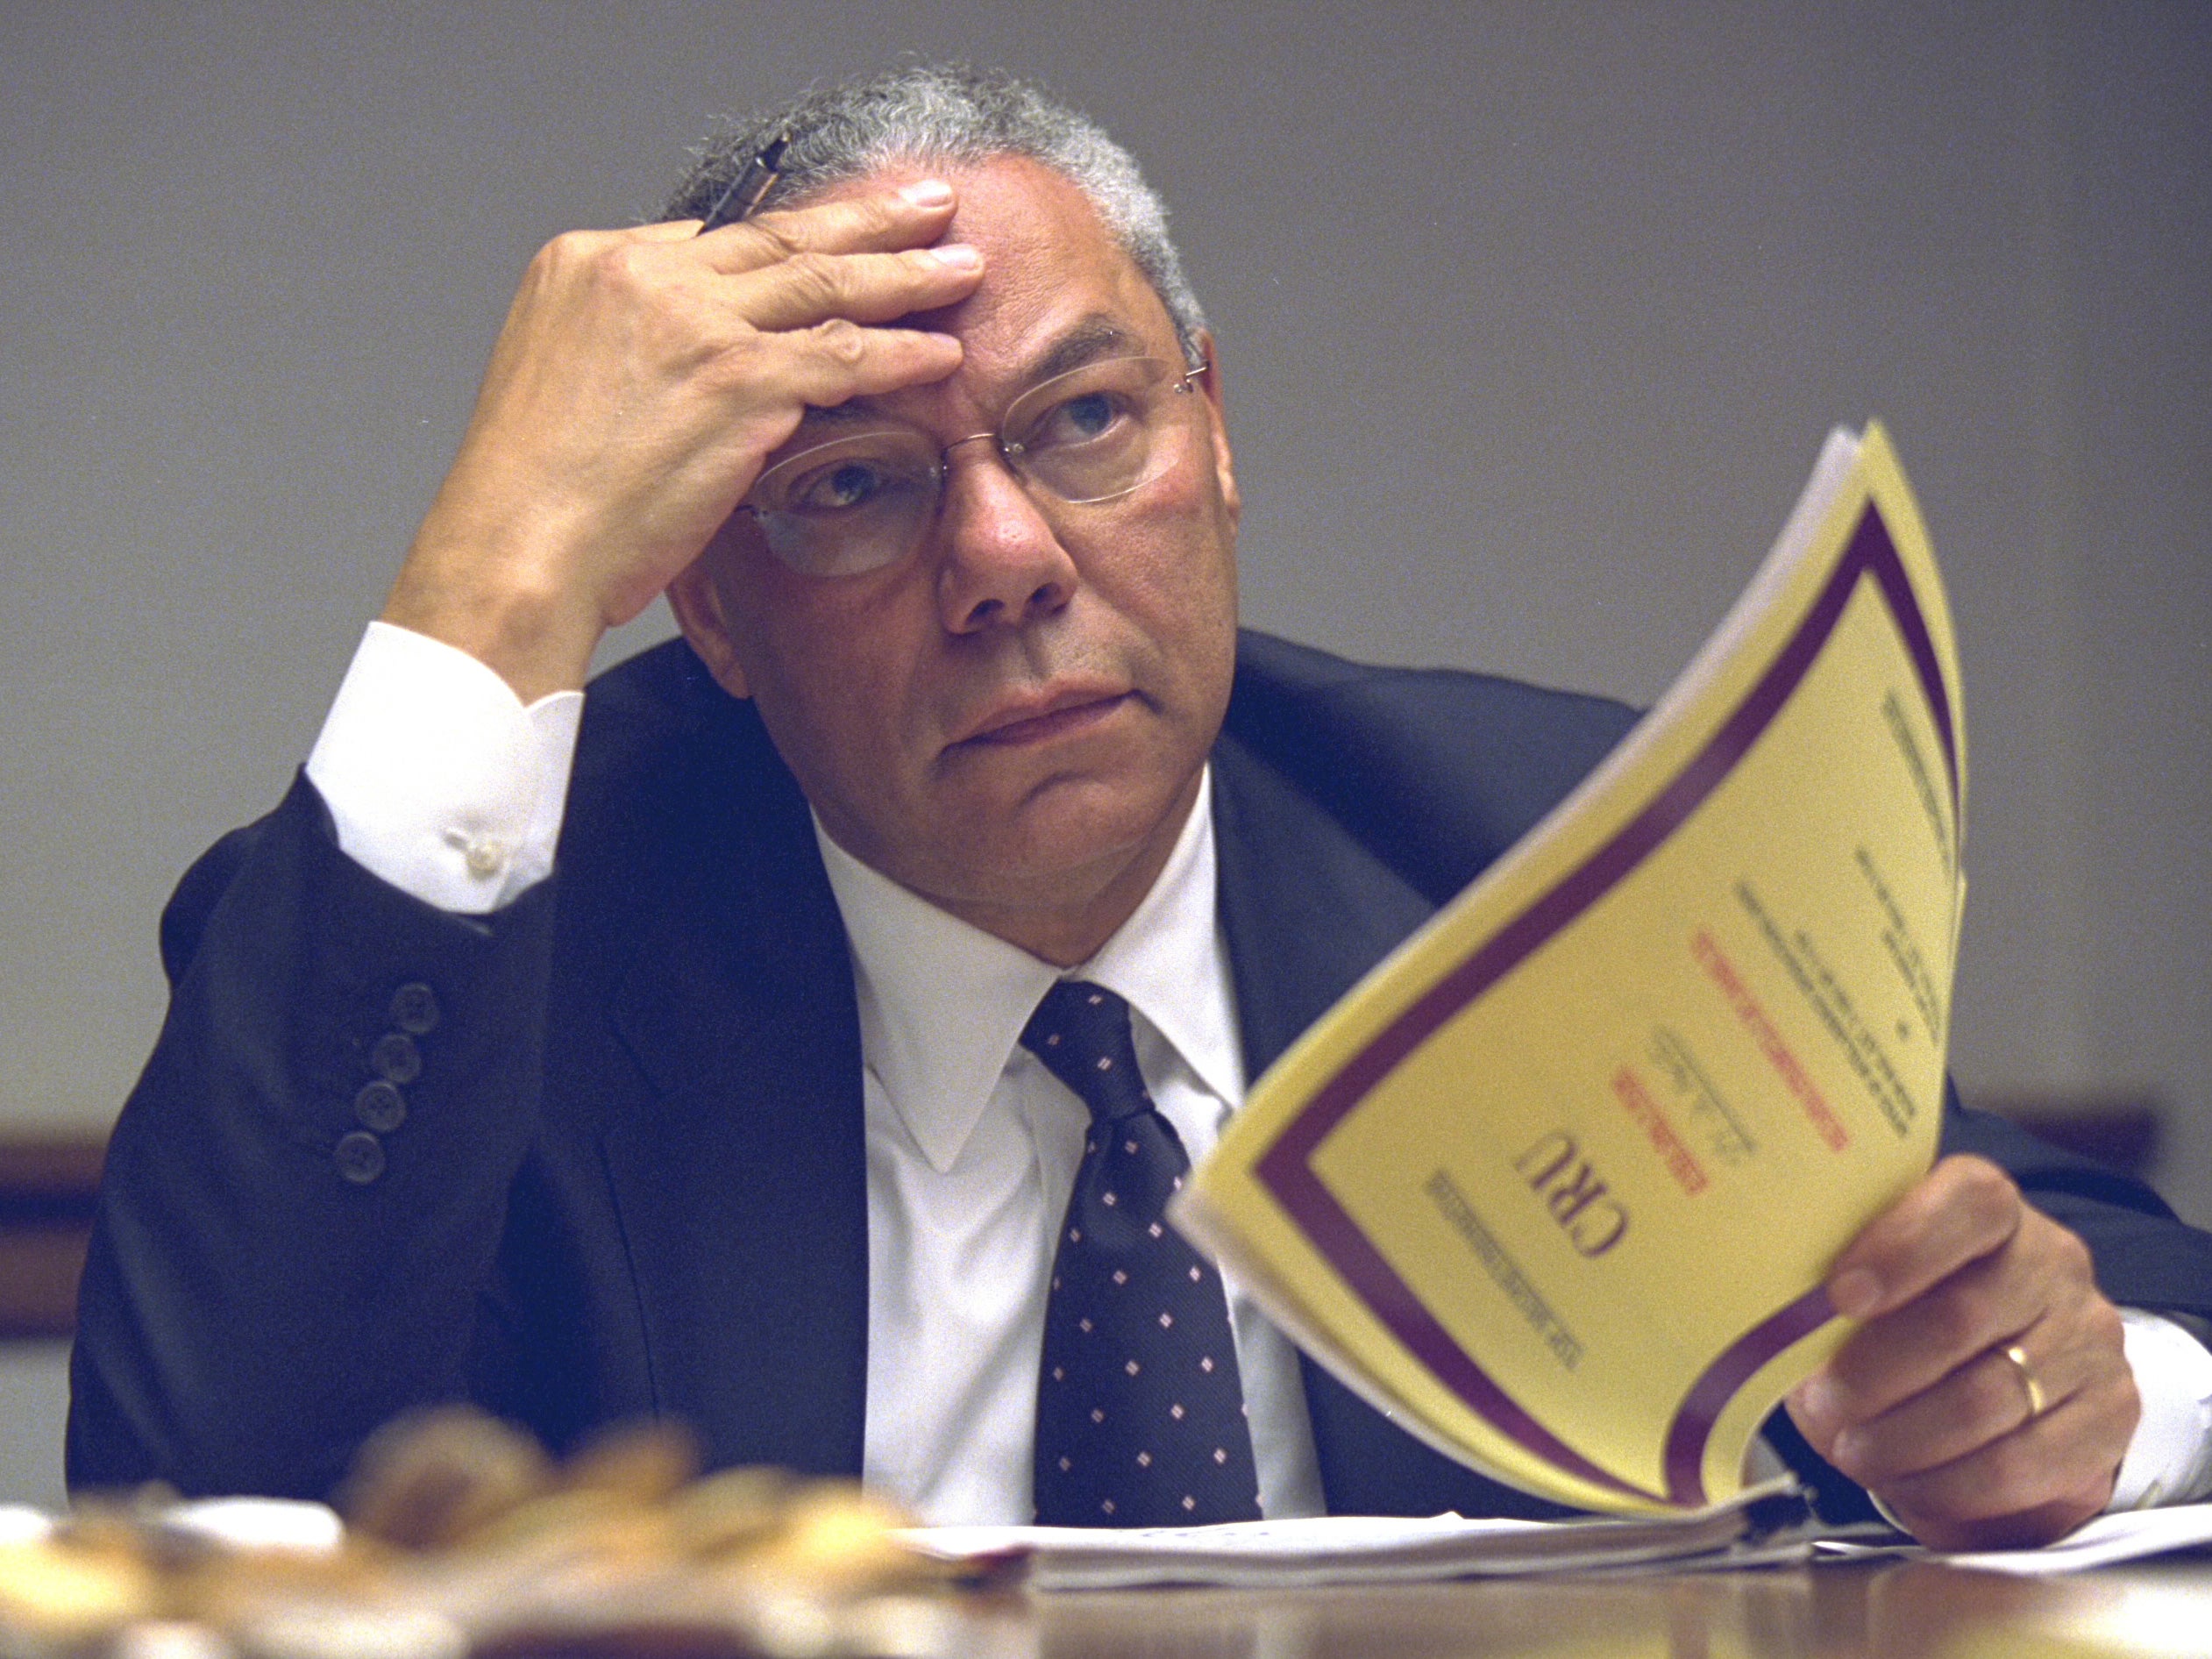 Former Secretary of State Colin Powell photographed in the emergency bunker